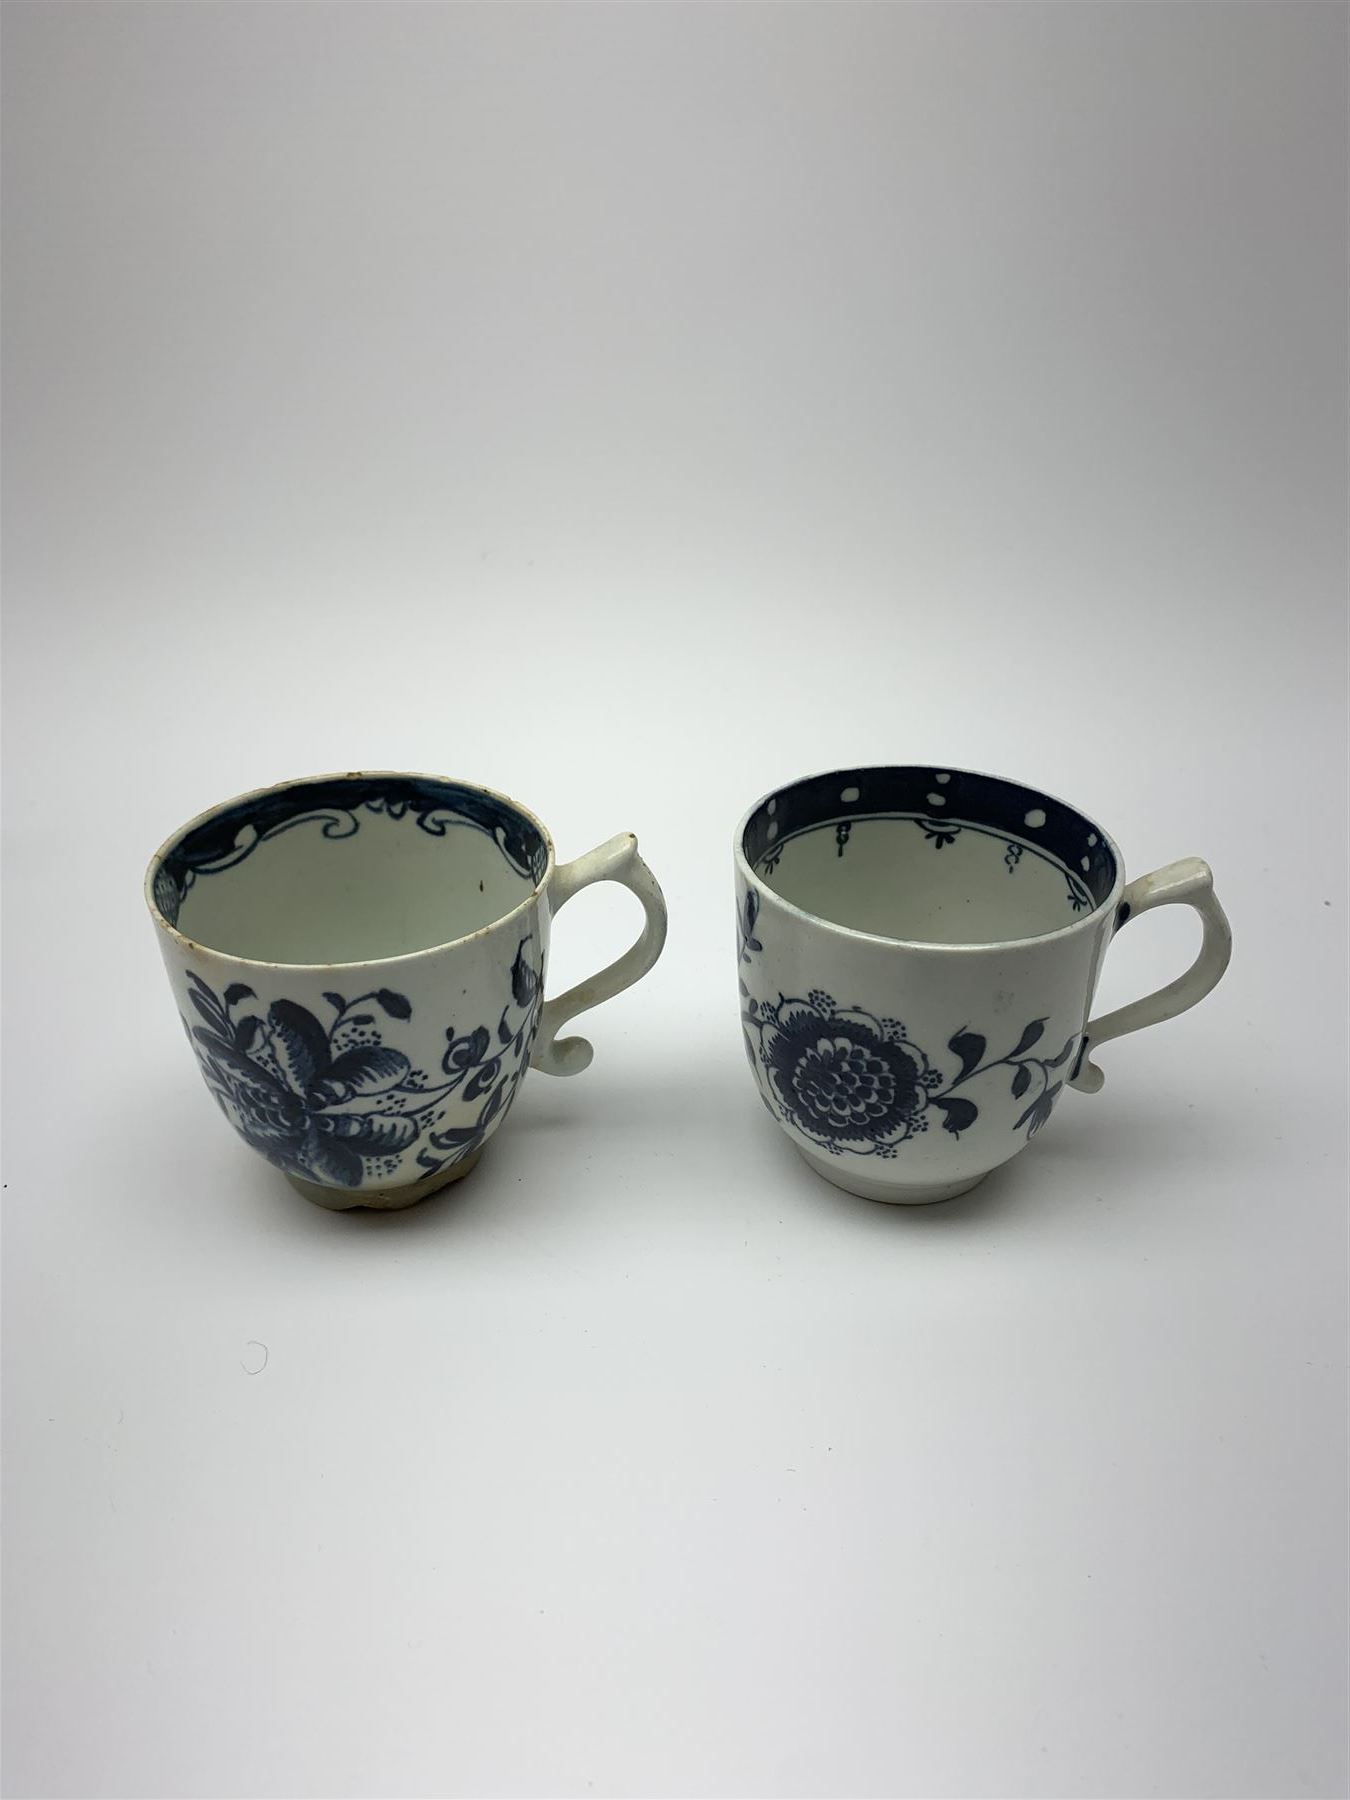 18th century Lowestoft coffee cup and saucer - Image 6 of 6